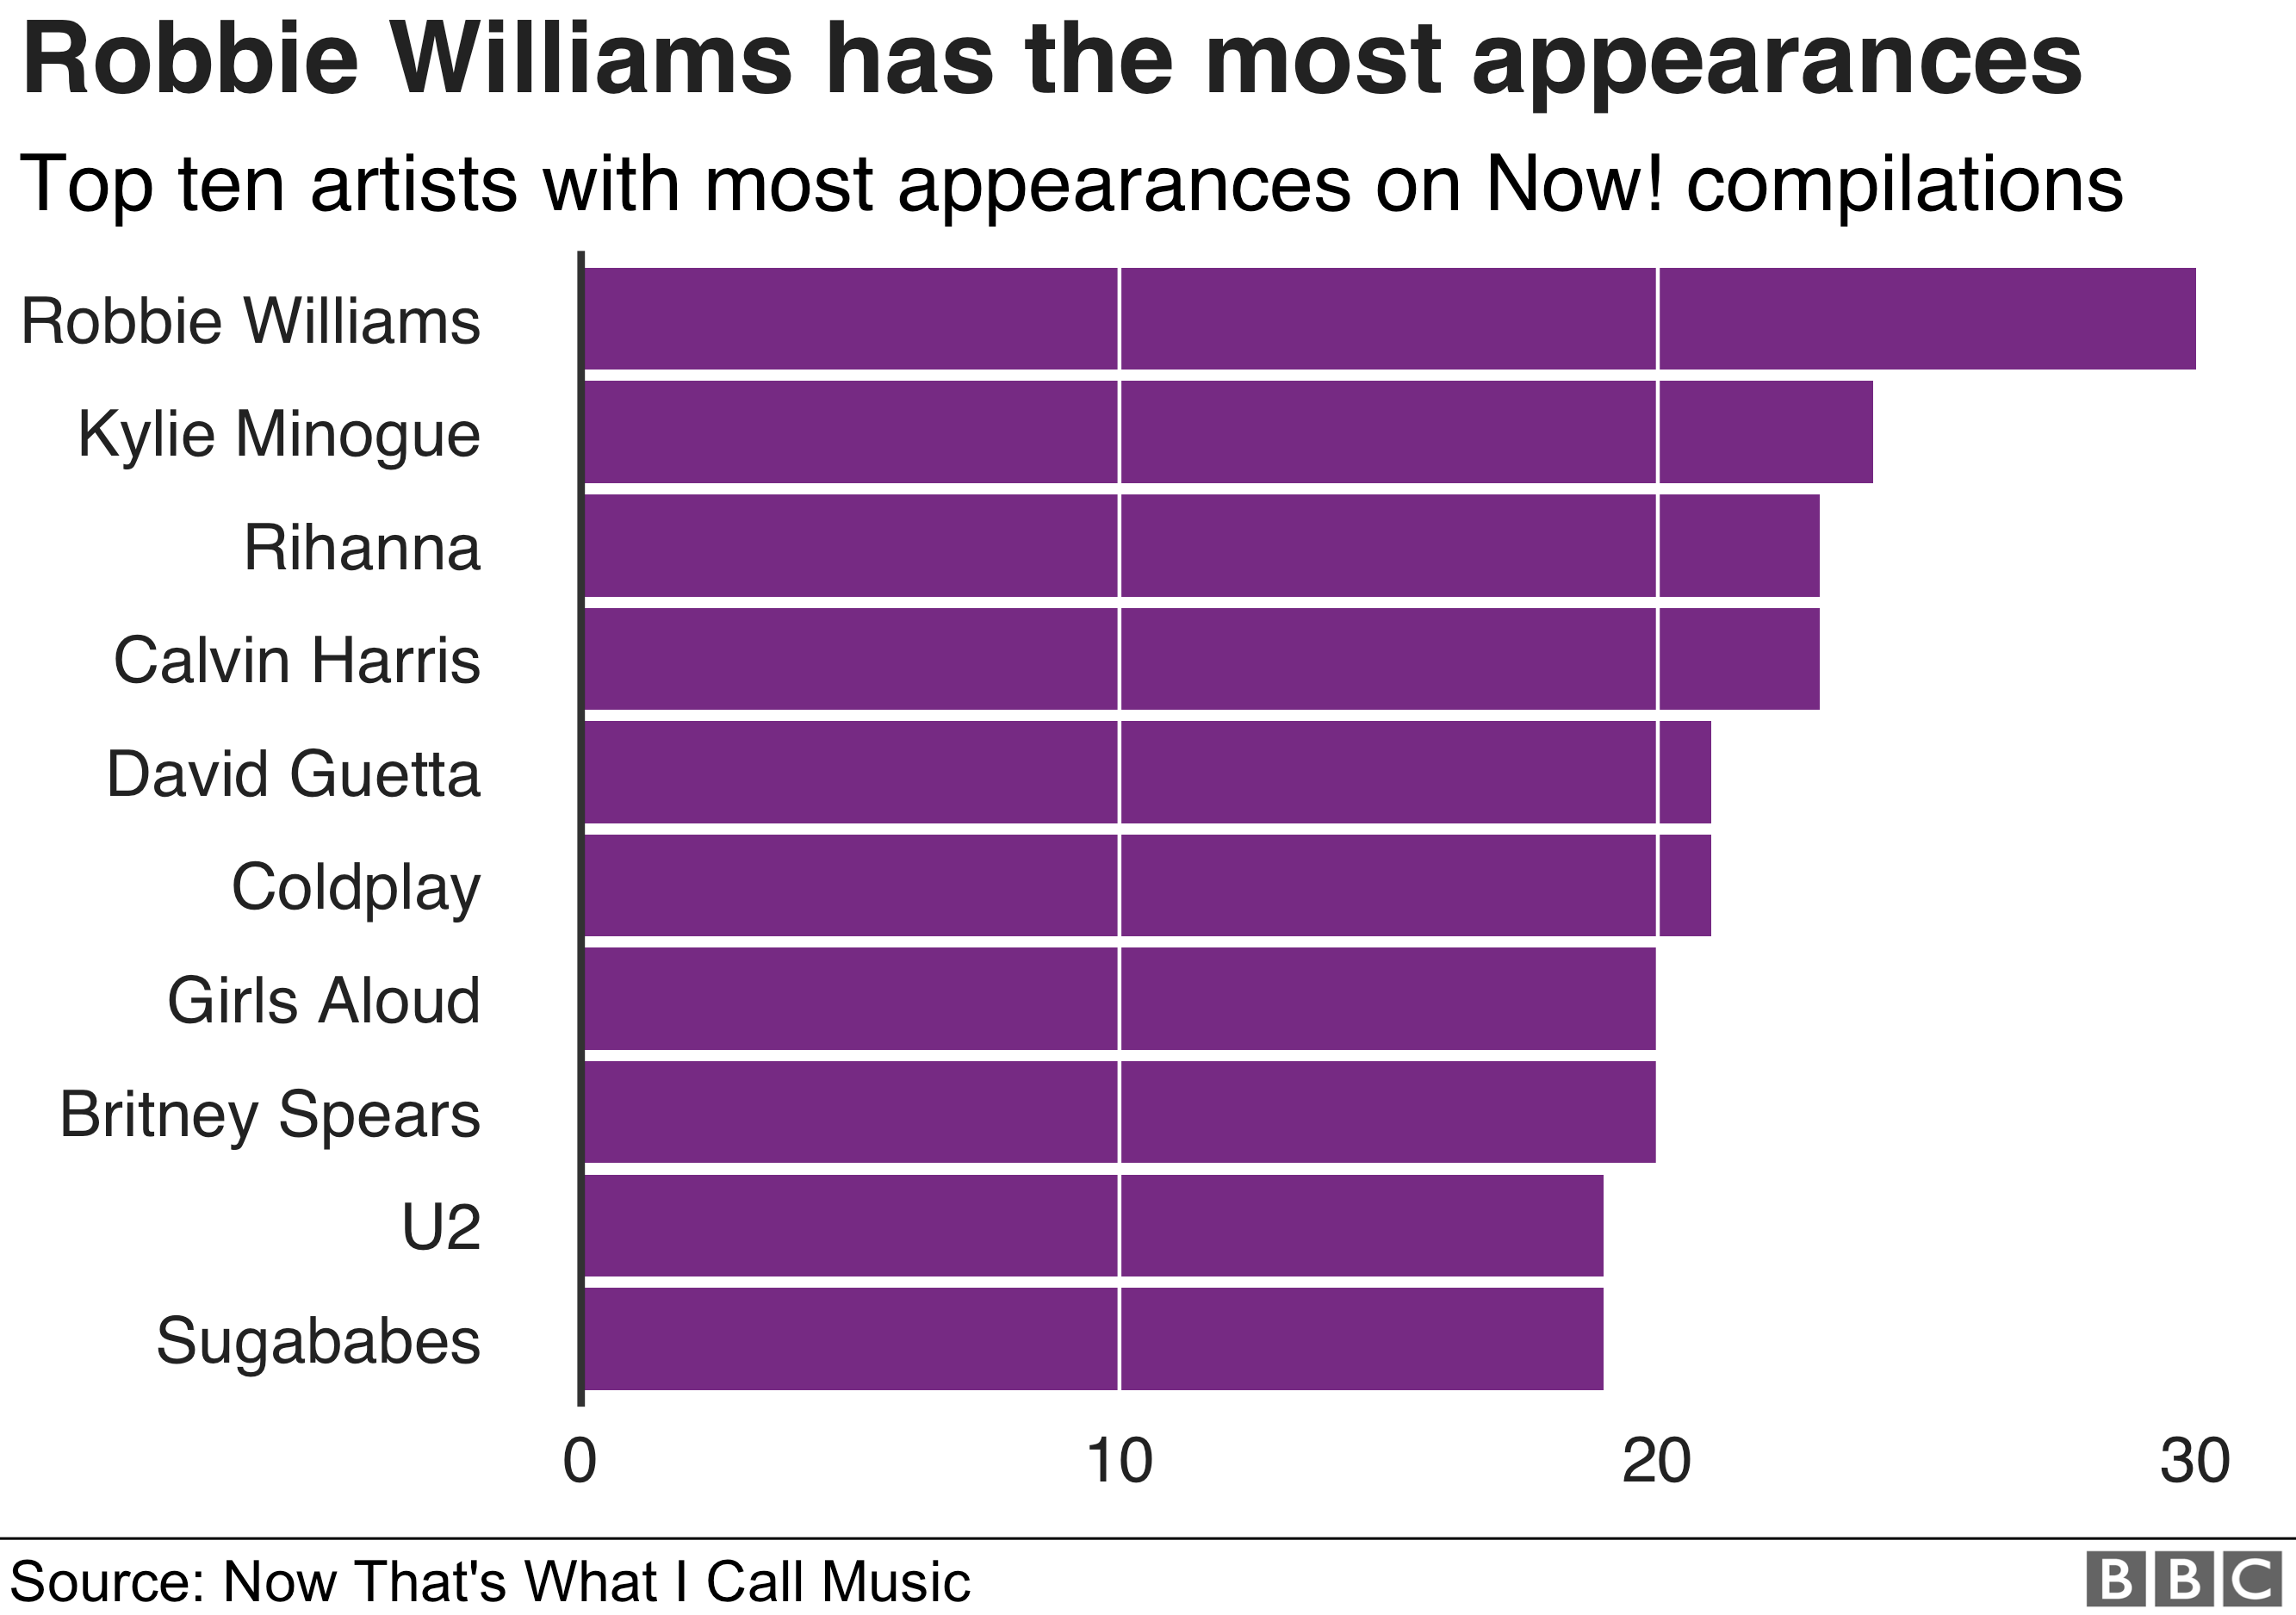 Graphic showing the artists with the most appearances on Now! compilations